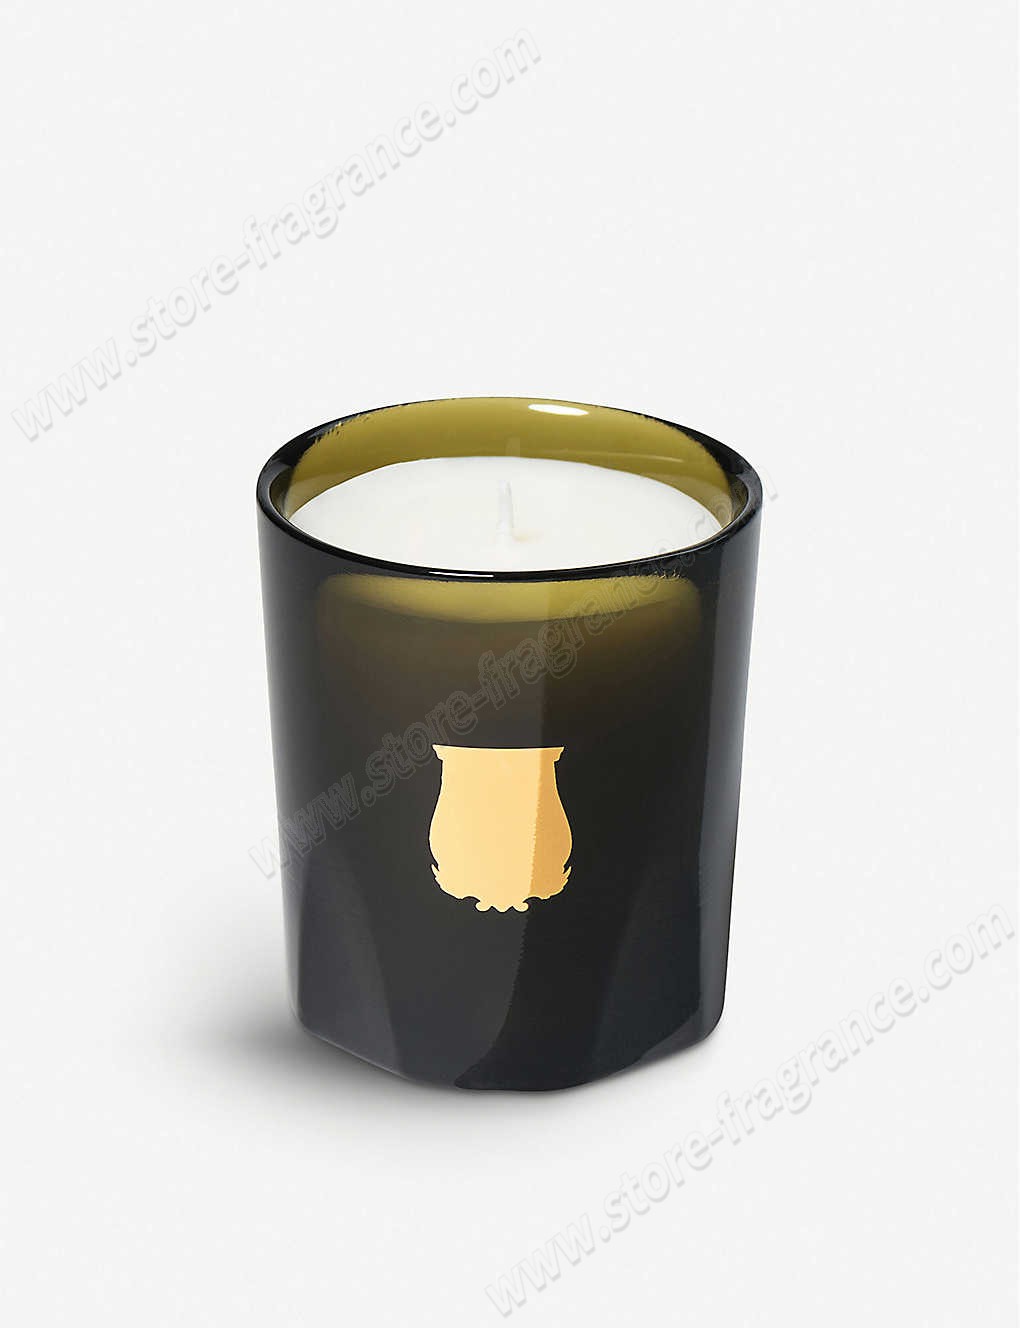 CIRE TRUDON/Abd El Kader scented candle 70g ✿ Discount Store - CIRE TRUDON/Abd El Kader scented candle 70g ✿ Discount Store